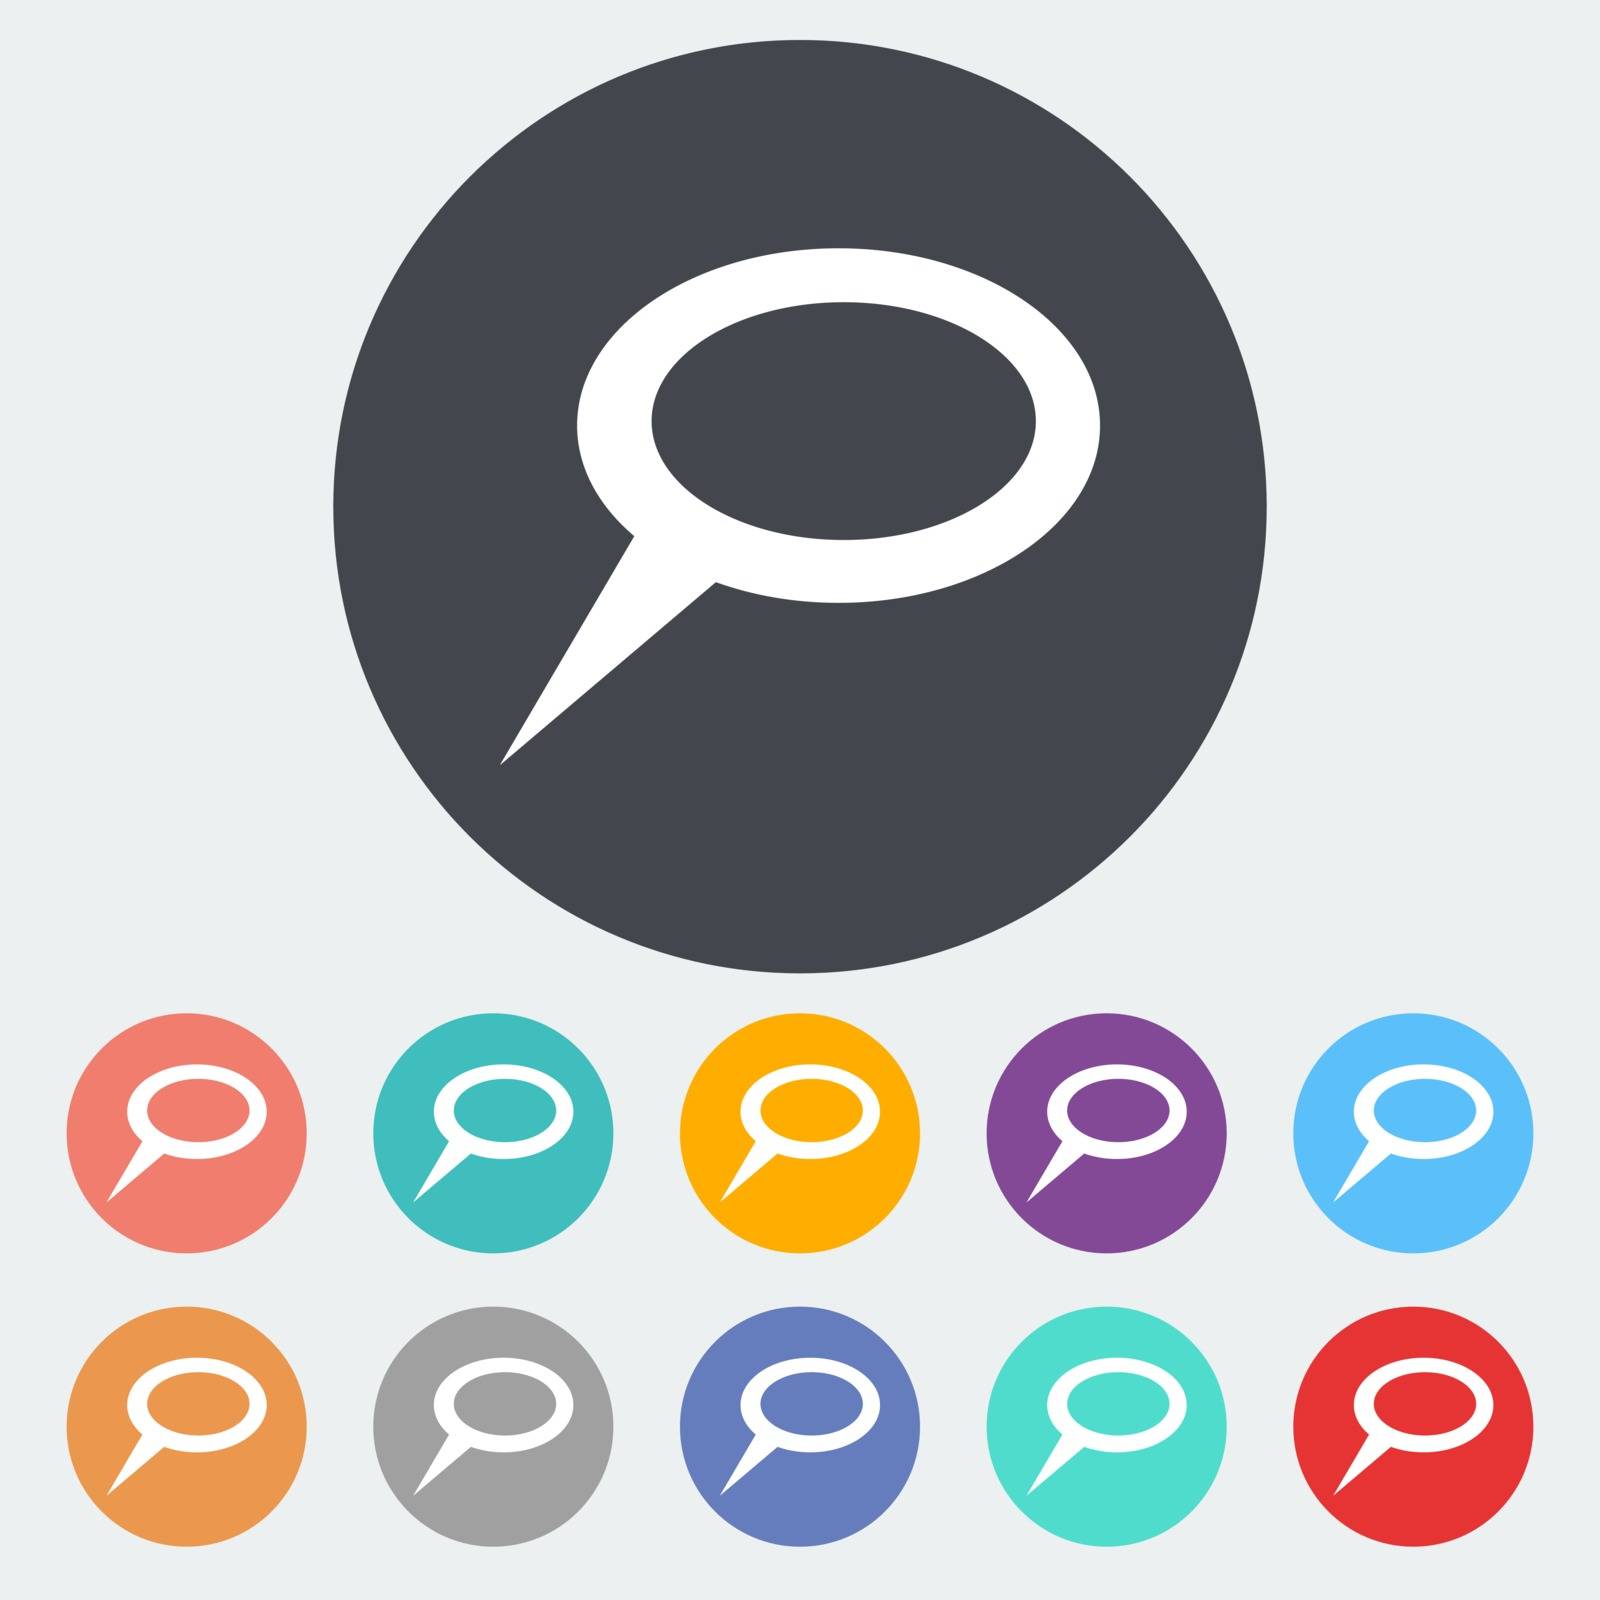 Chat. Single flat icon on the circle. Vector illustration.